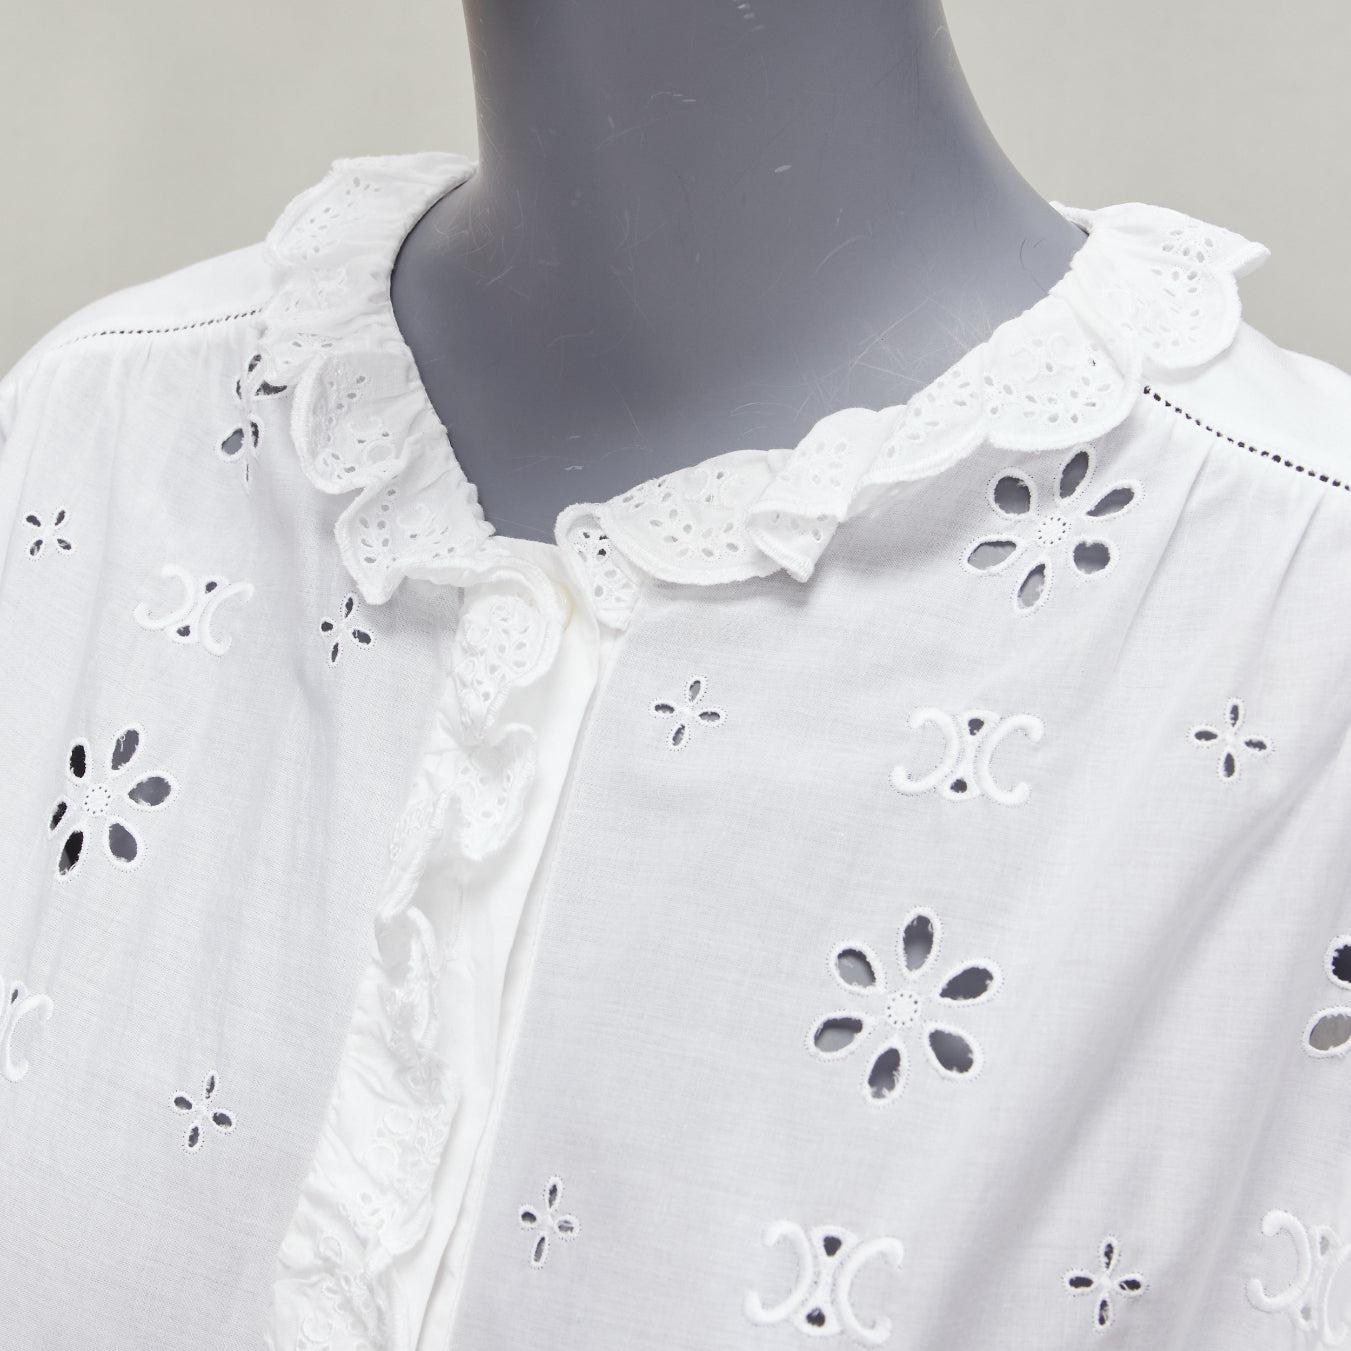 CELINE white triomphe logo lace eyelet embroidery peasant shirt FR40 L
Reference: NKLL/A00169
Brand: Celine
Designer: Hedi Slimane
Material: Feels like cotton
Color: White
Pattern: Lace
Closure: Button
Extra Details: CELINE triomphe logo merge into